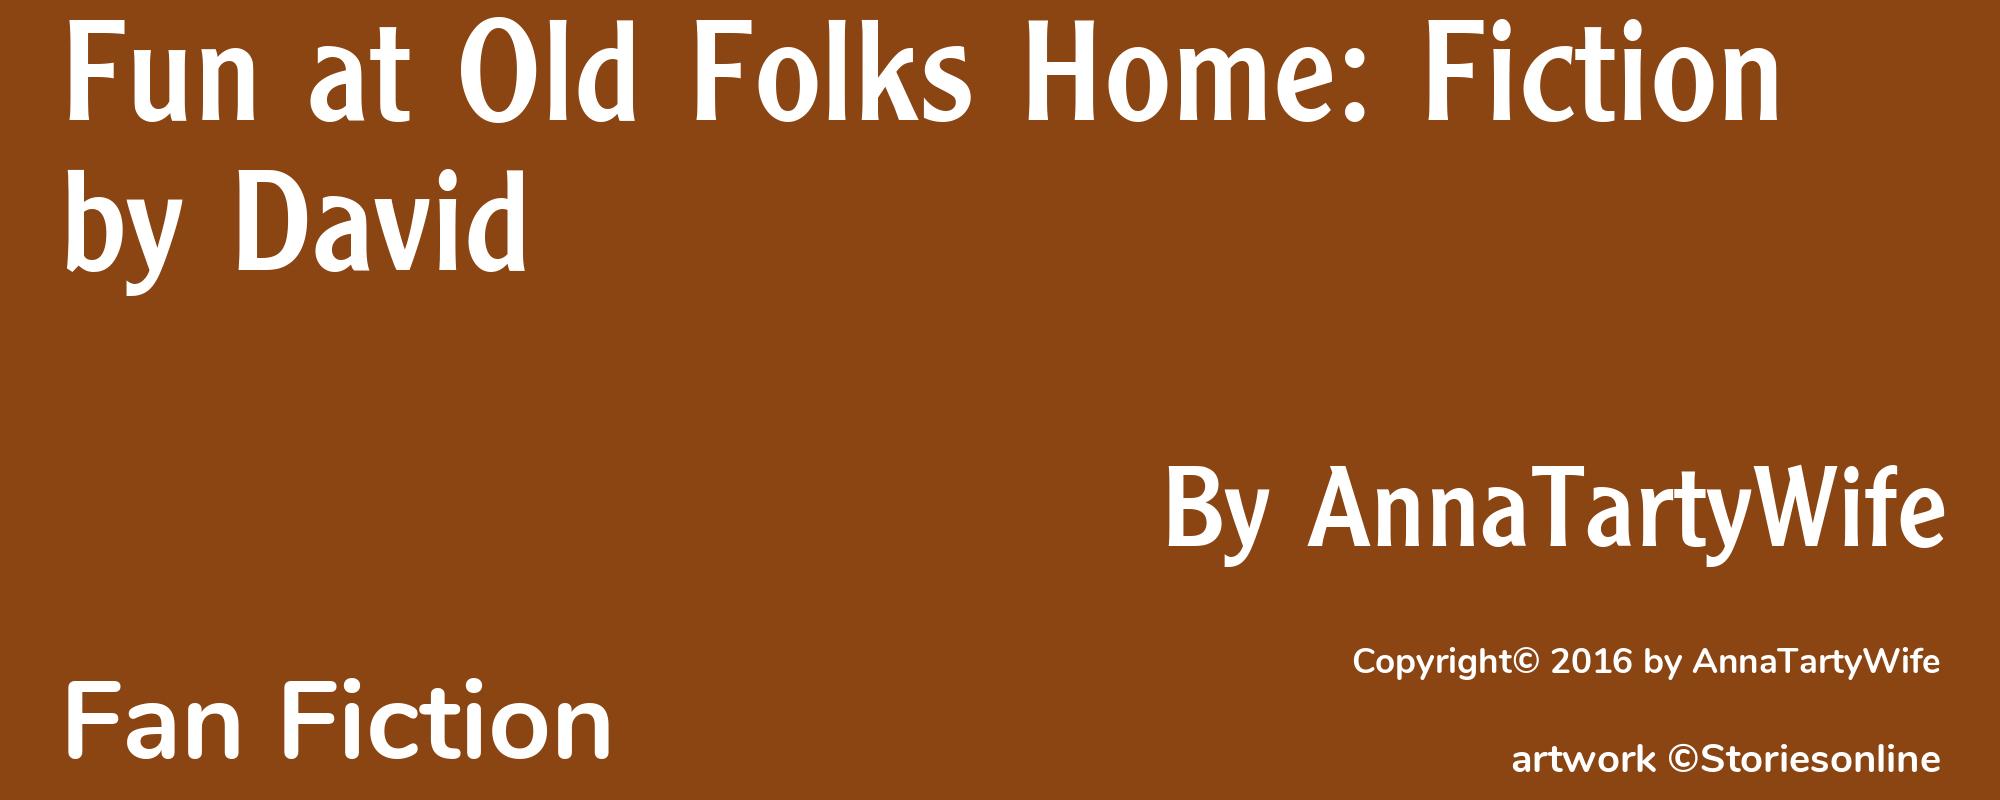 Fun at Old Folks Home: Fiction by David - Cover